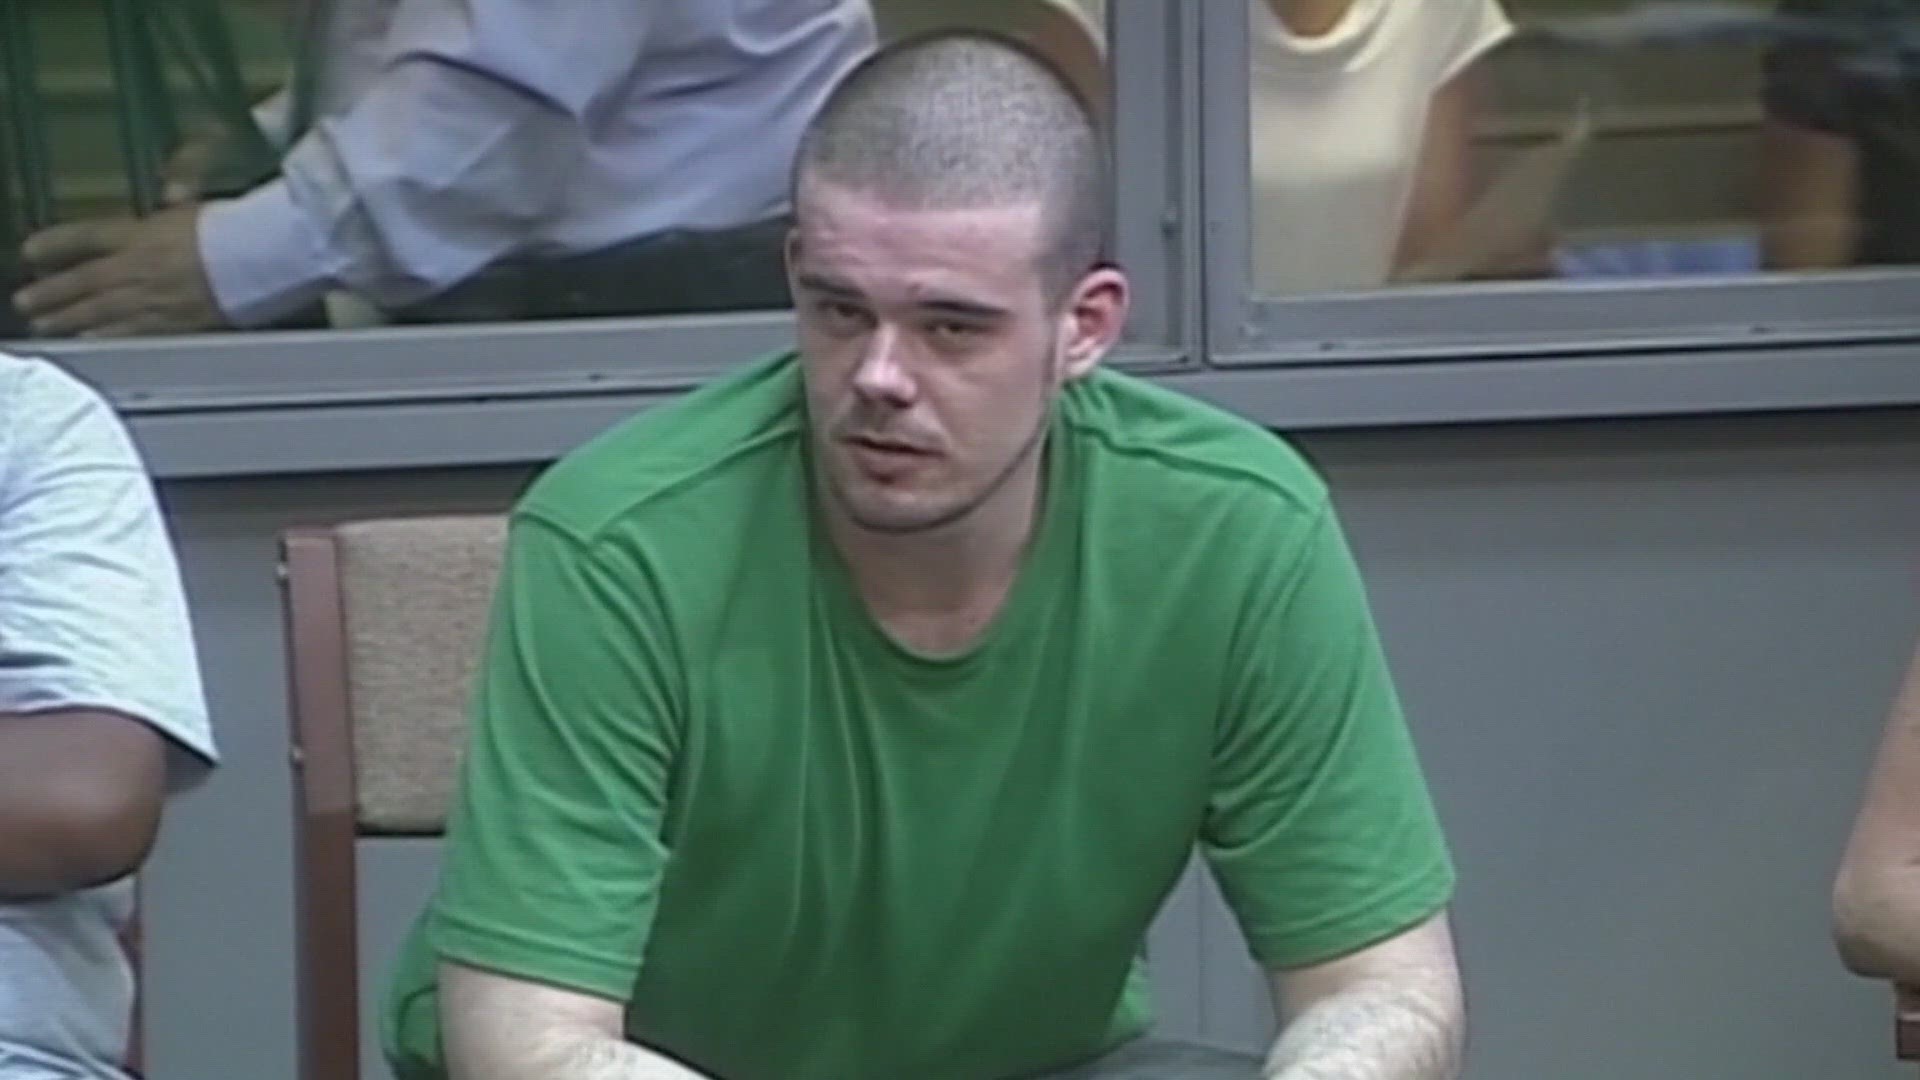 Van der Sloot made the admission as part of a plea deal as Kathy Park reports.